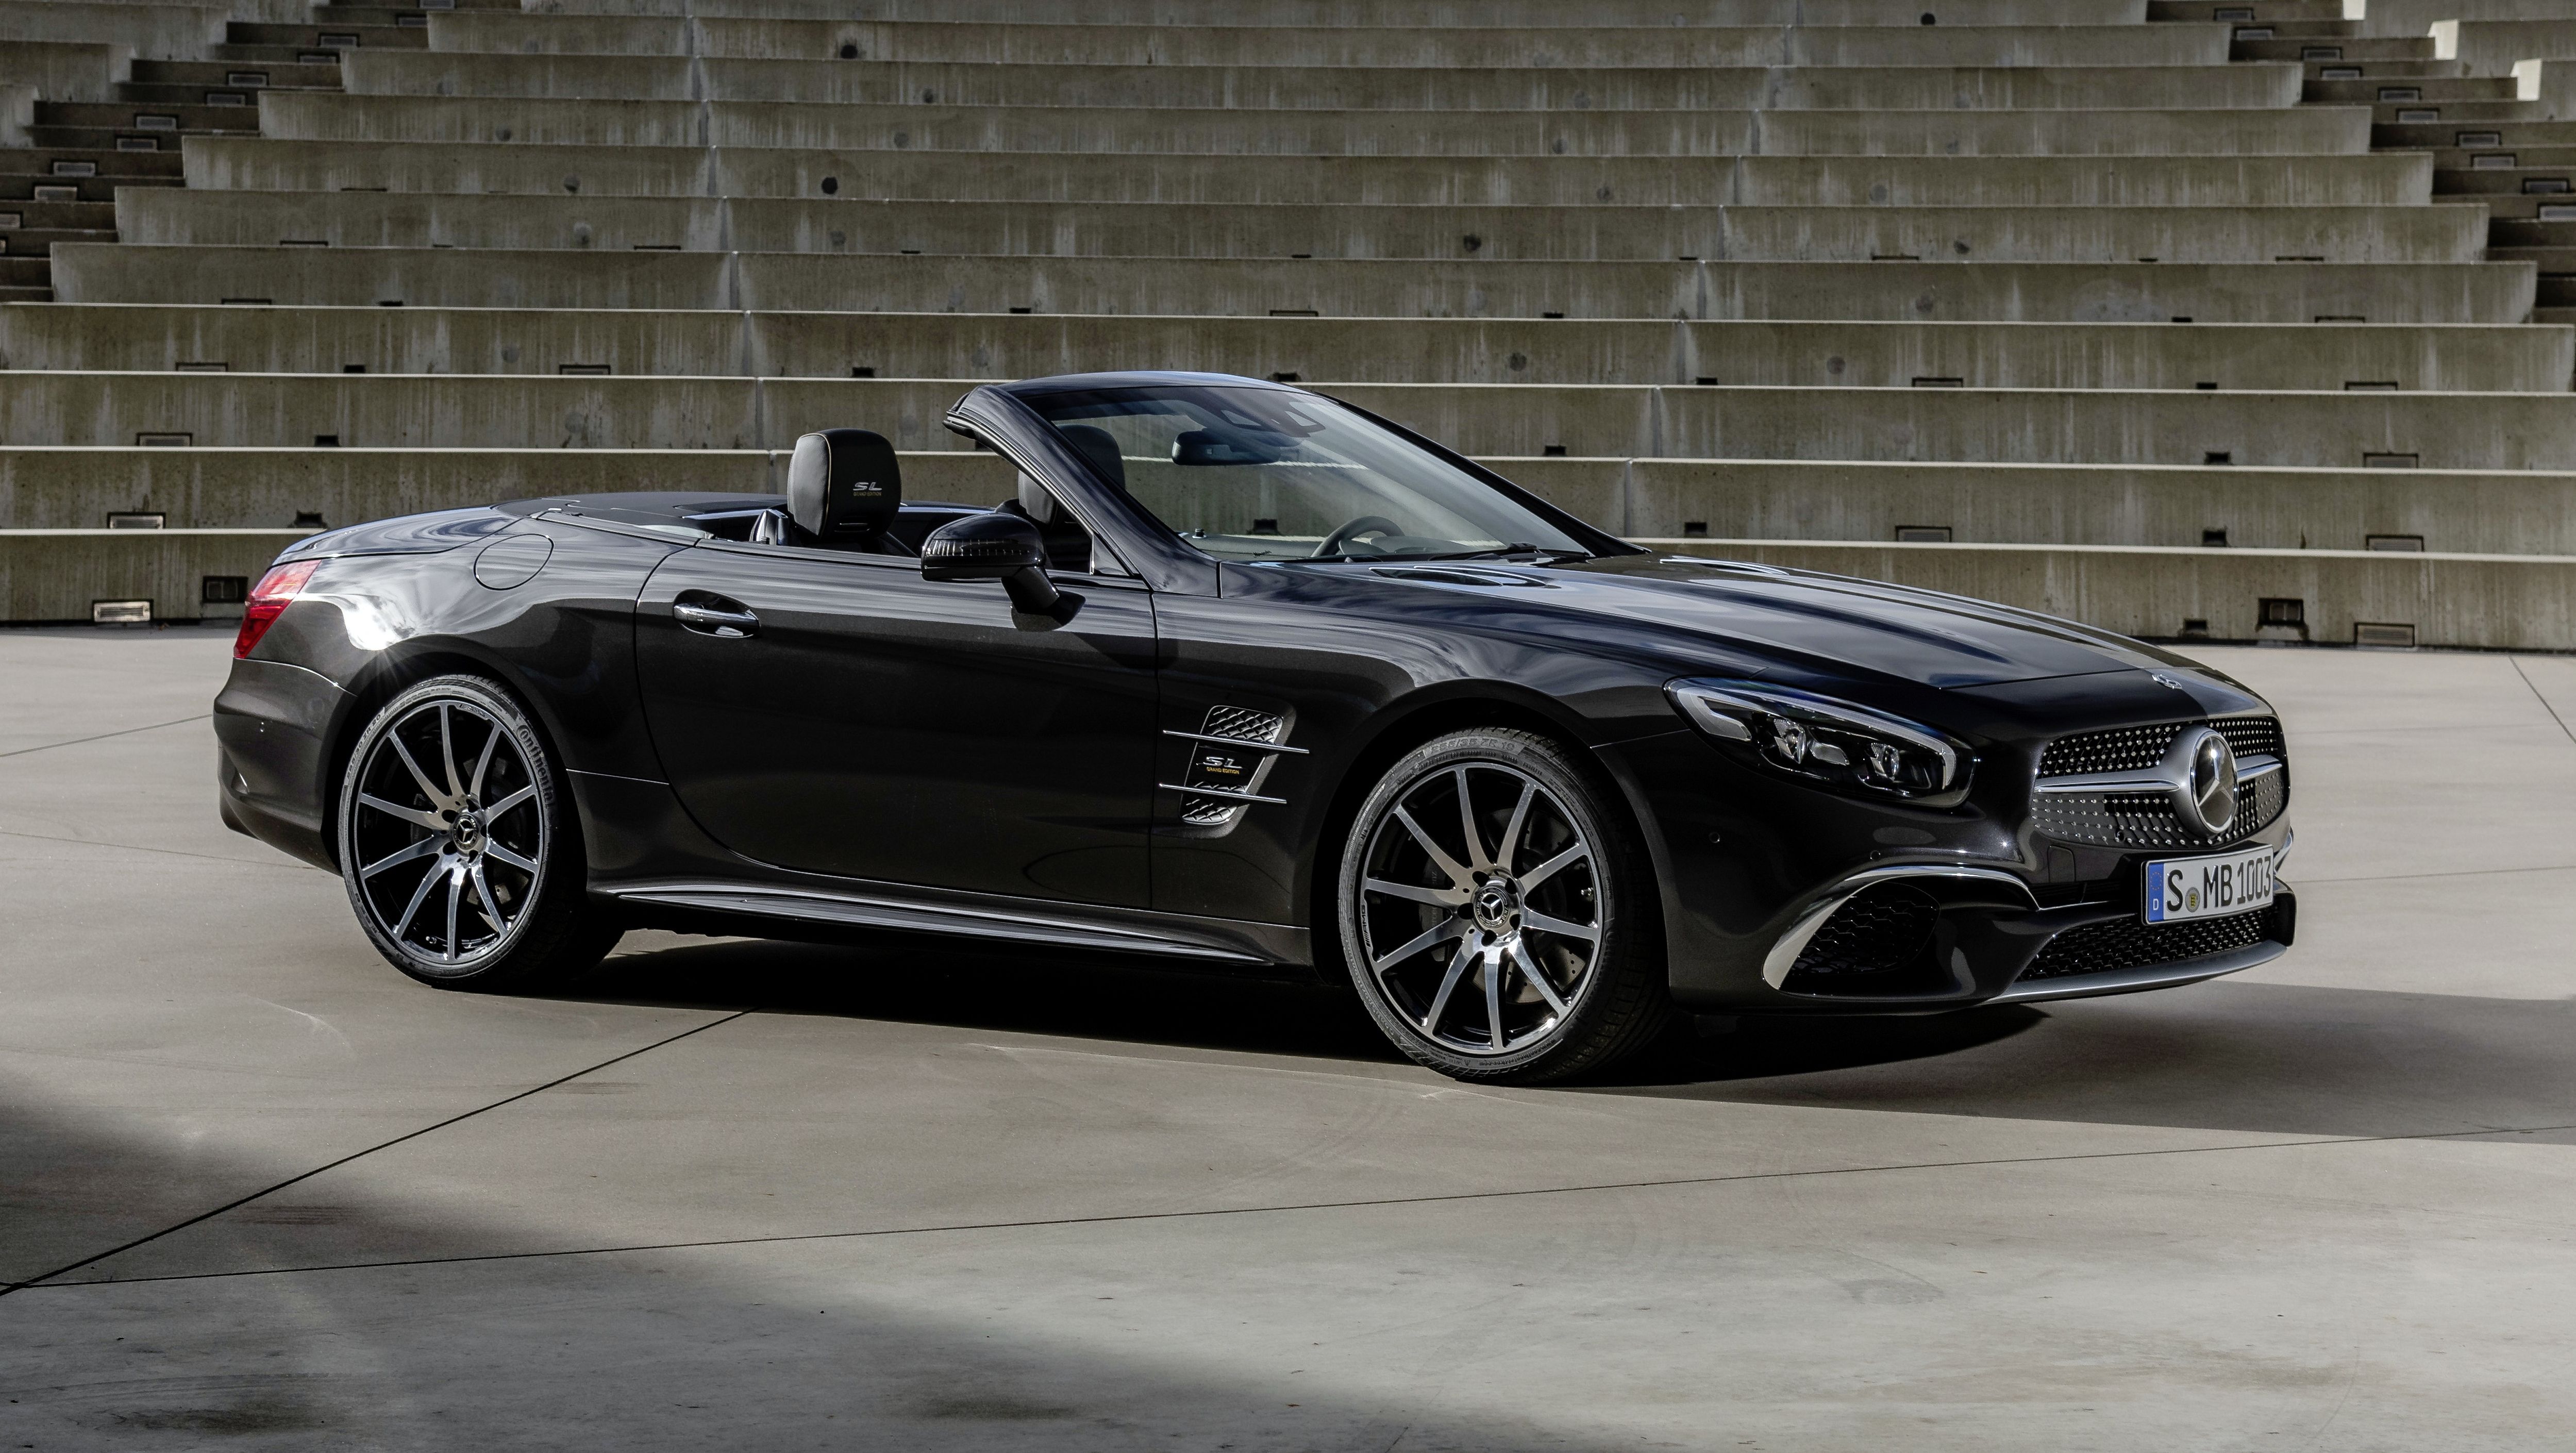 New Mercedes-AMG SL 55 is Convertible Nirvana - Palm Beach Illustrated